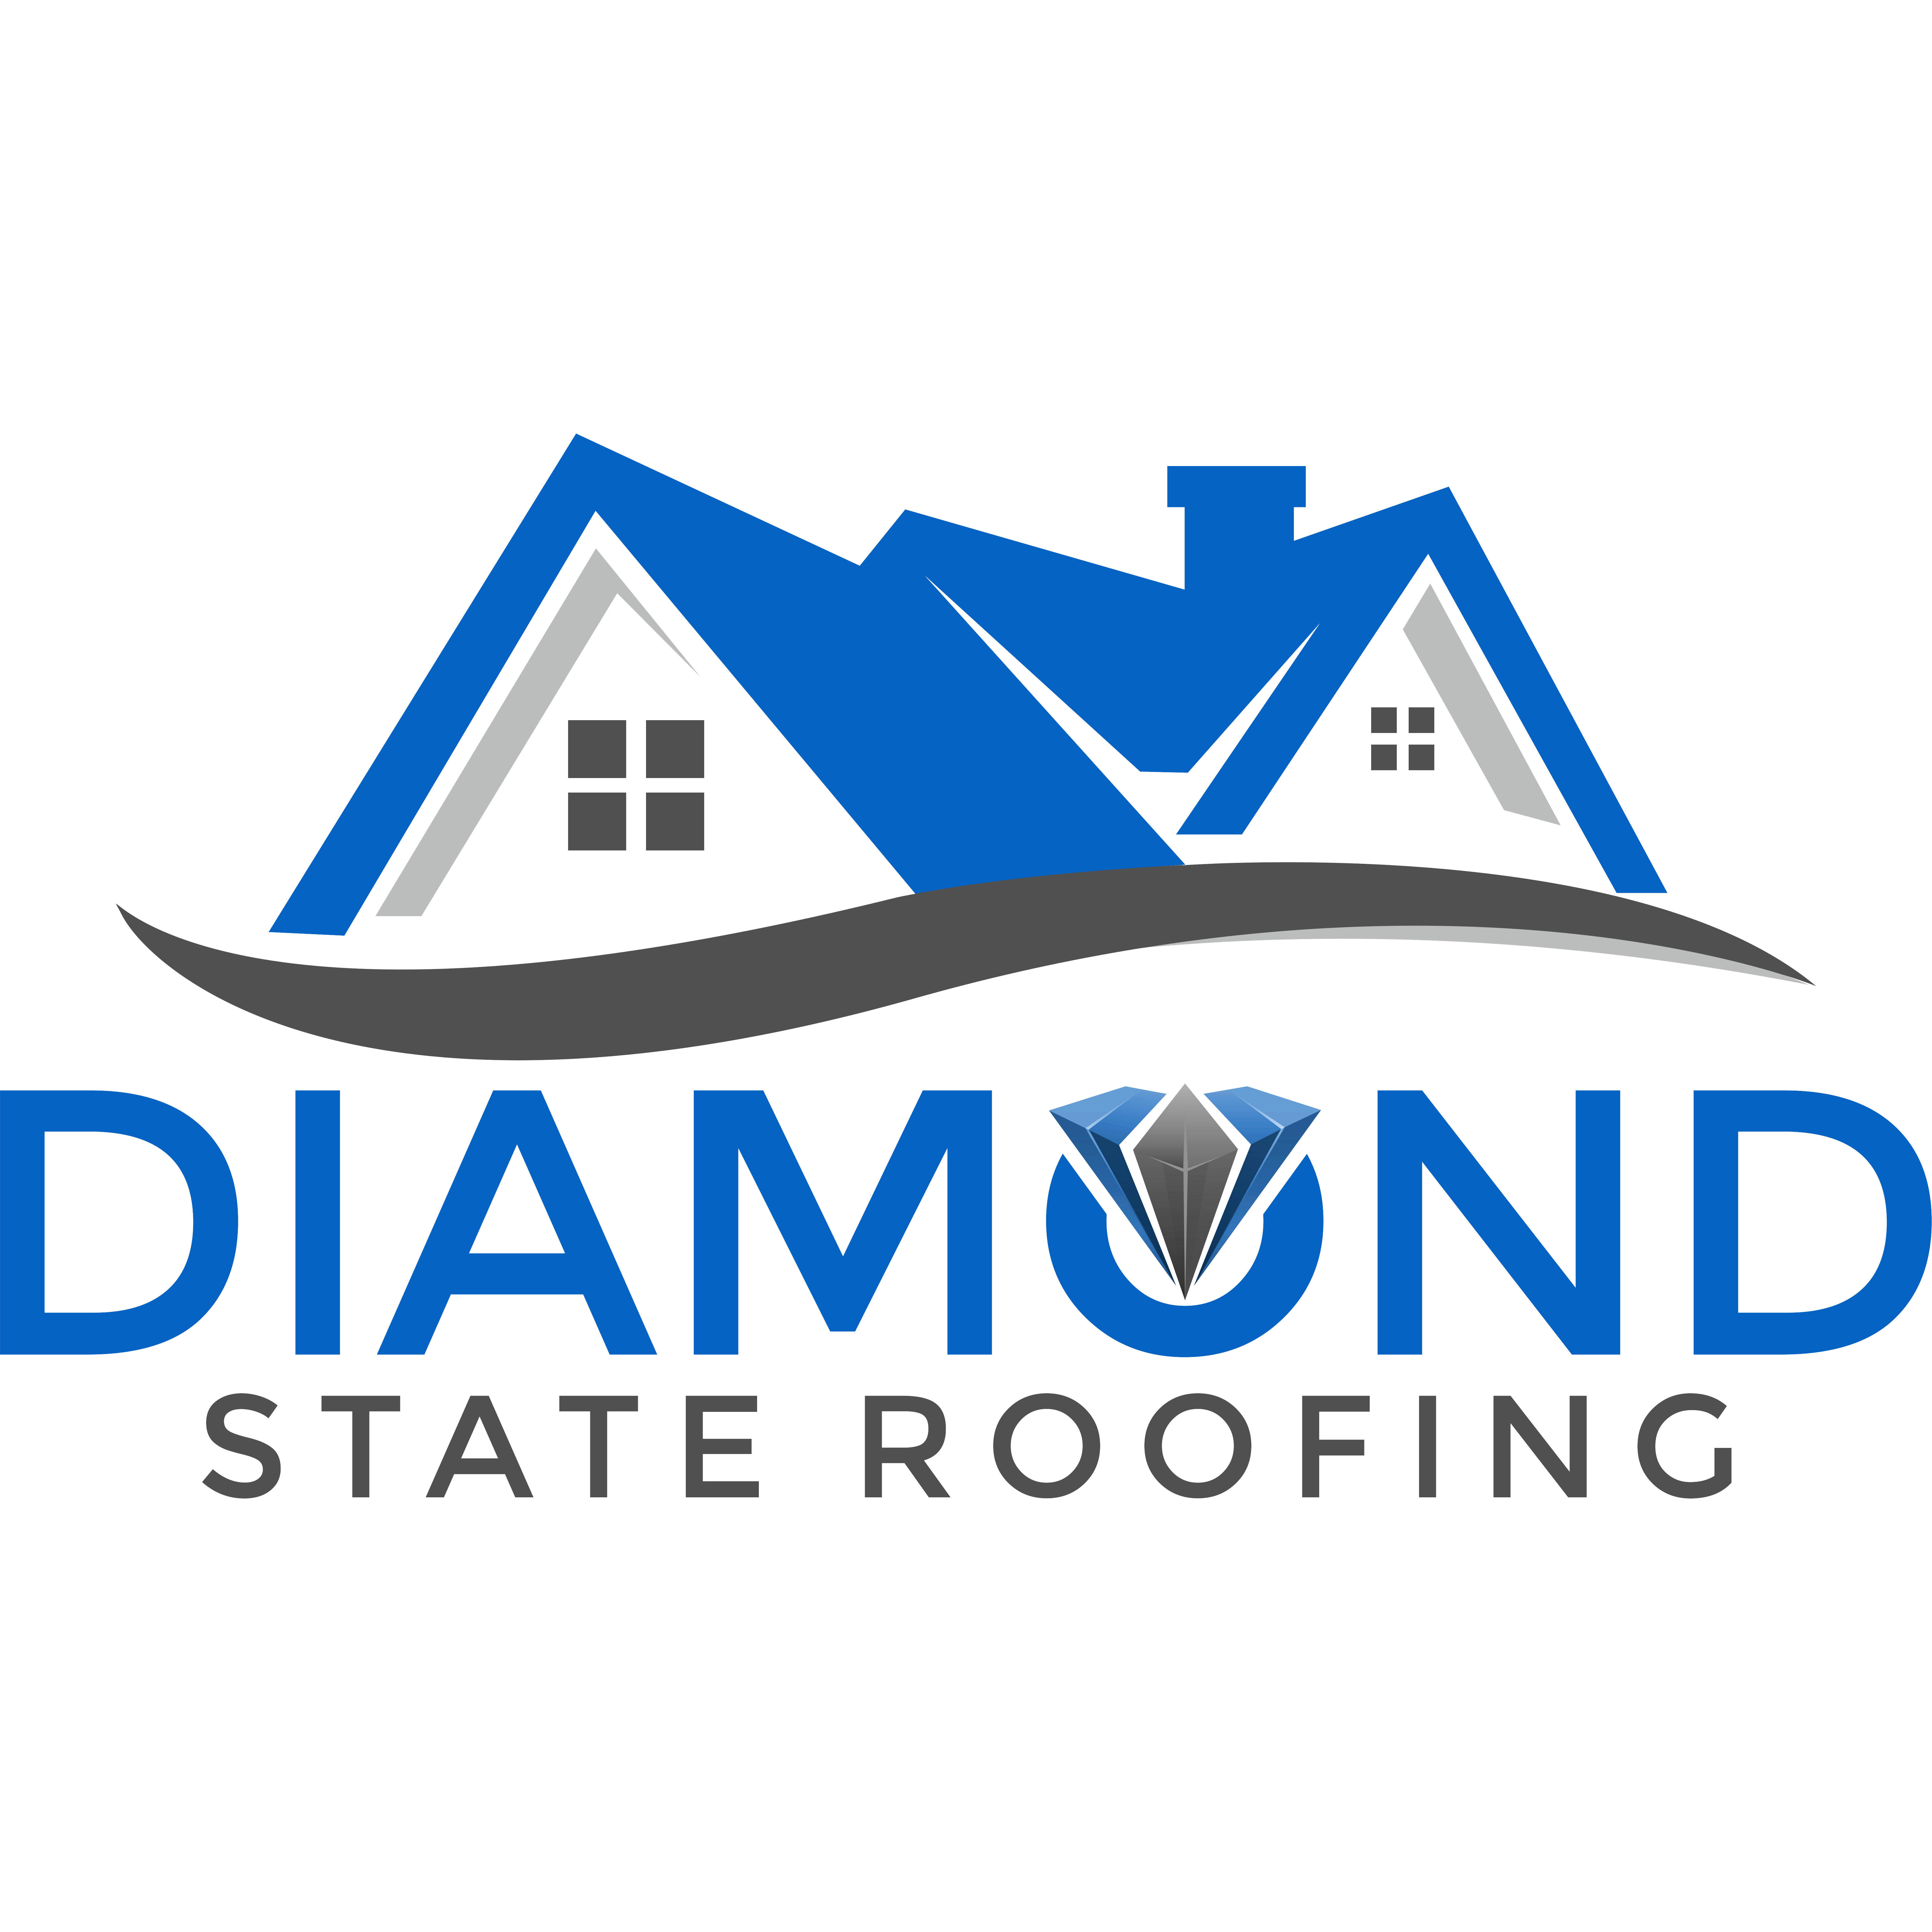 Diamond State Roofing and Restoration - Townsend, DE 19734 - (888)600-7188 | ShowMeLocal.com